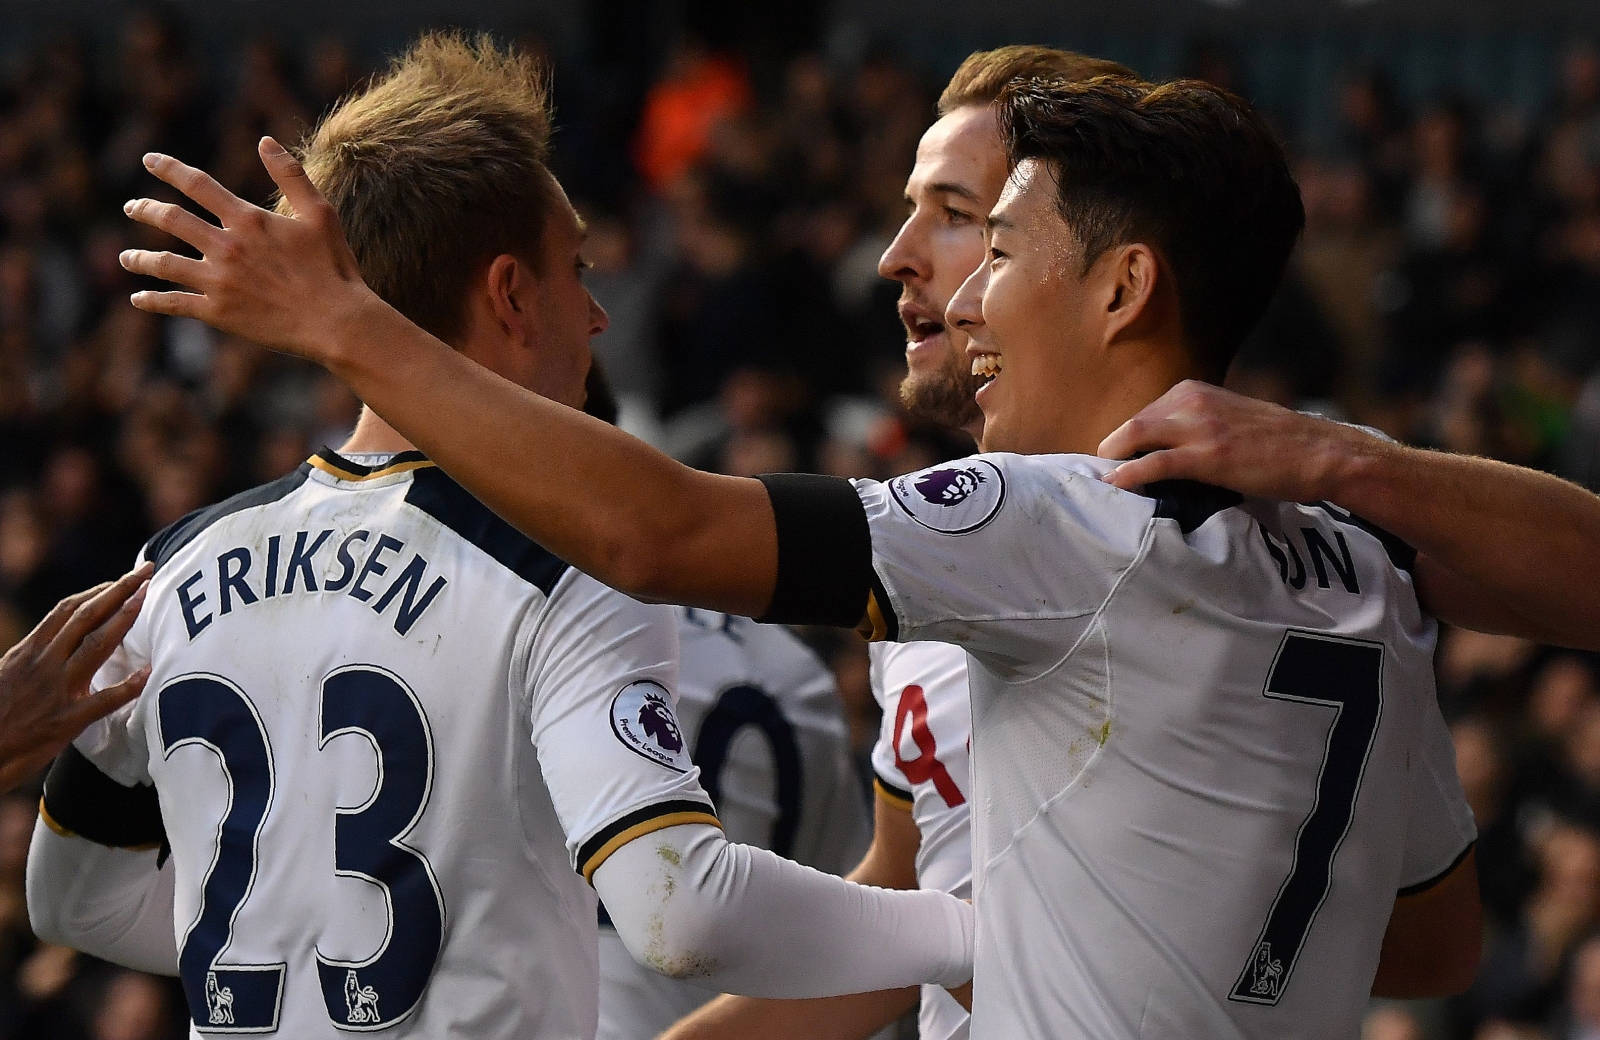 Tottenham Hotspur 5-0 Swansea City: Harry Kane and Christian Eriksen net doubles in rout1600 x 1040